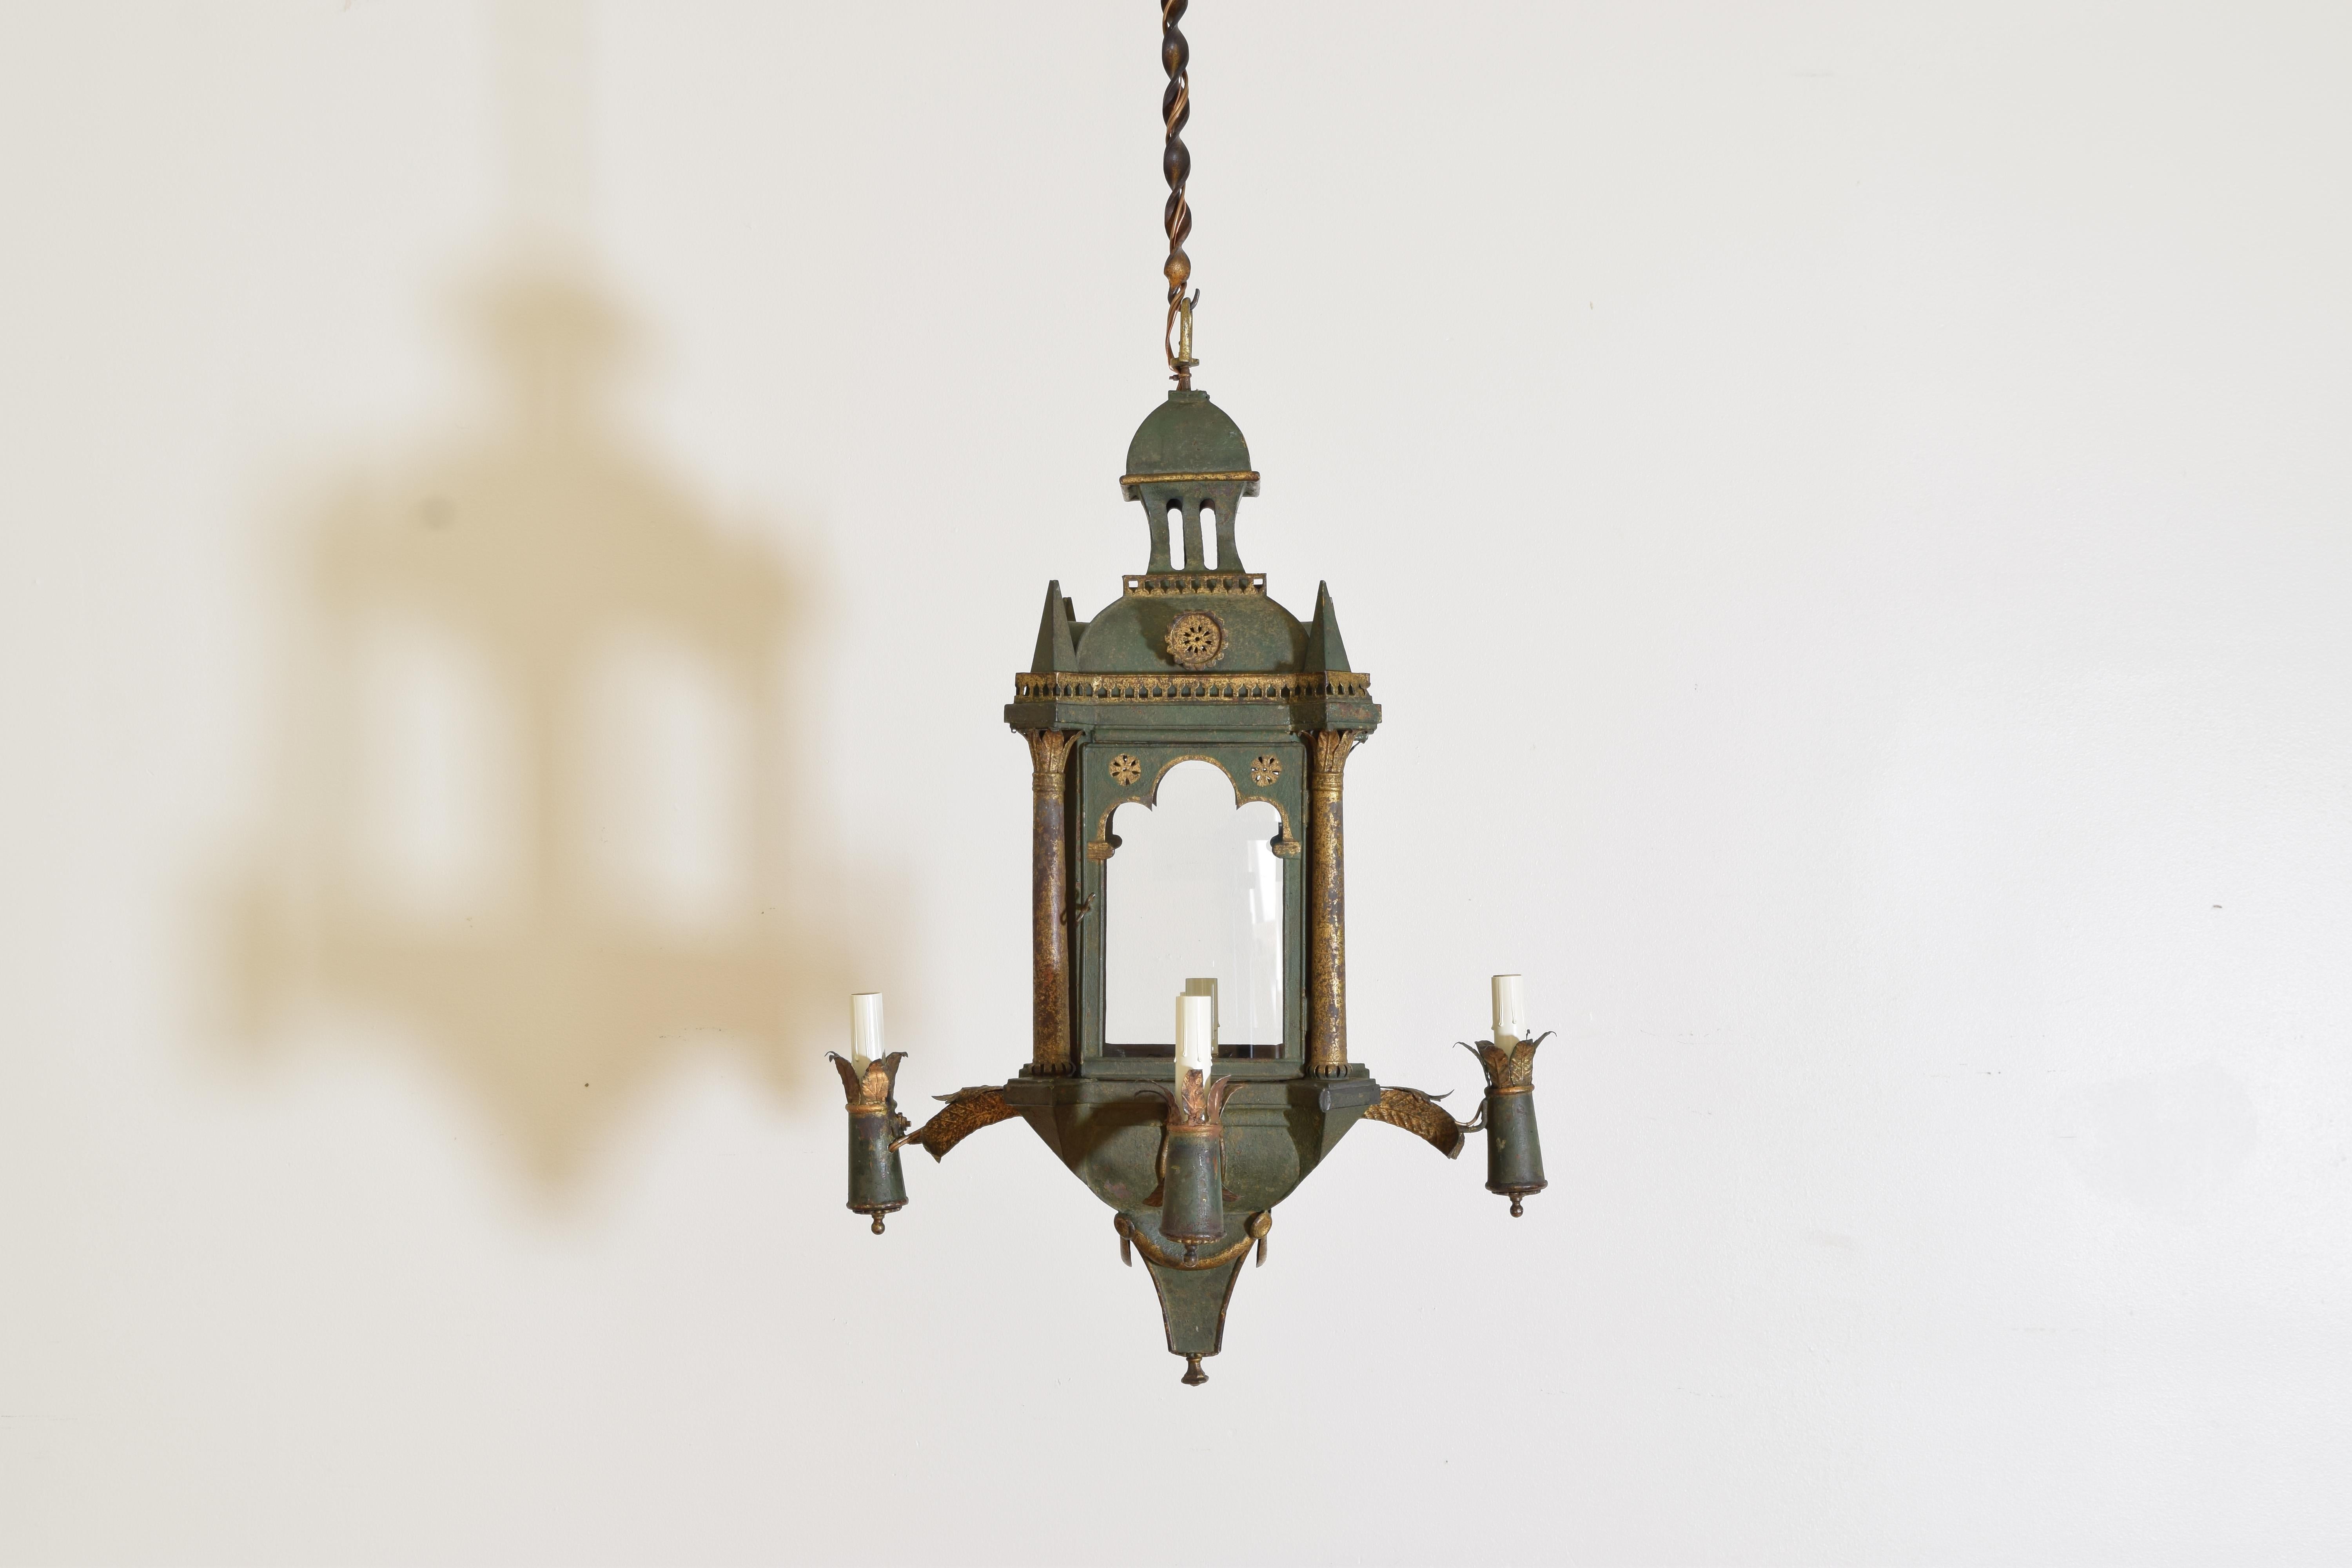 This unique painted and gilt tole lantern features one internal light accessed by a door as well as four arms with external lights, inspired by Venice with it’s trefoil arches and peaked turrets this lantern is a mix of styles and periods, newly